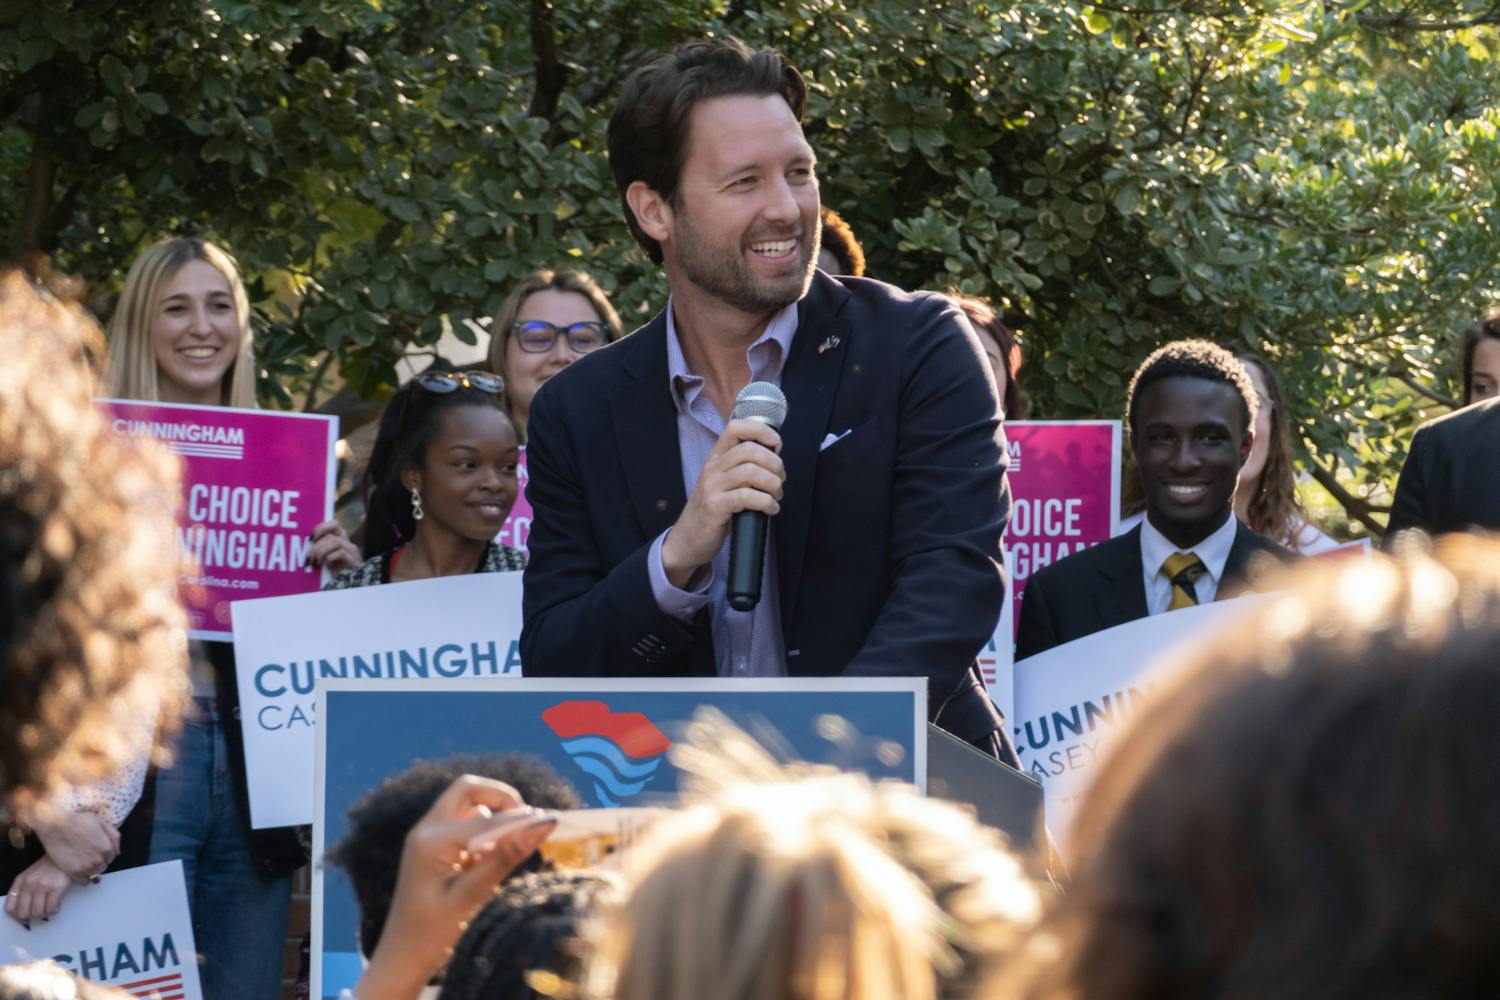 Democratic nominee for Governor of South Carolina, Joe Cunningham presents his campaign to a crowd of students on the Russell House Patio on Oct. 20, 2022. Cunningham spoke on women’s rights, the legalization of marijuana and sports betting, raising teacher pay, and fixing roads. &nbsp;The democratic nominee finished his afternoon rally by speaking directly to students and taking pictures with his supporters in attendance. Photos captured by Kristen Pittman | The Daily Gamecock